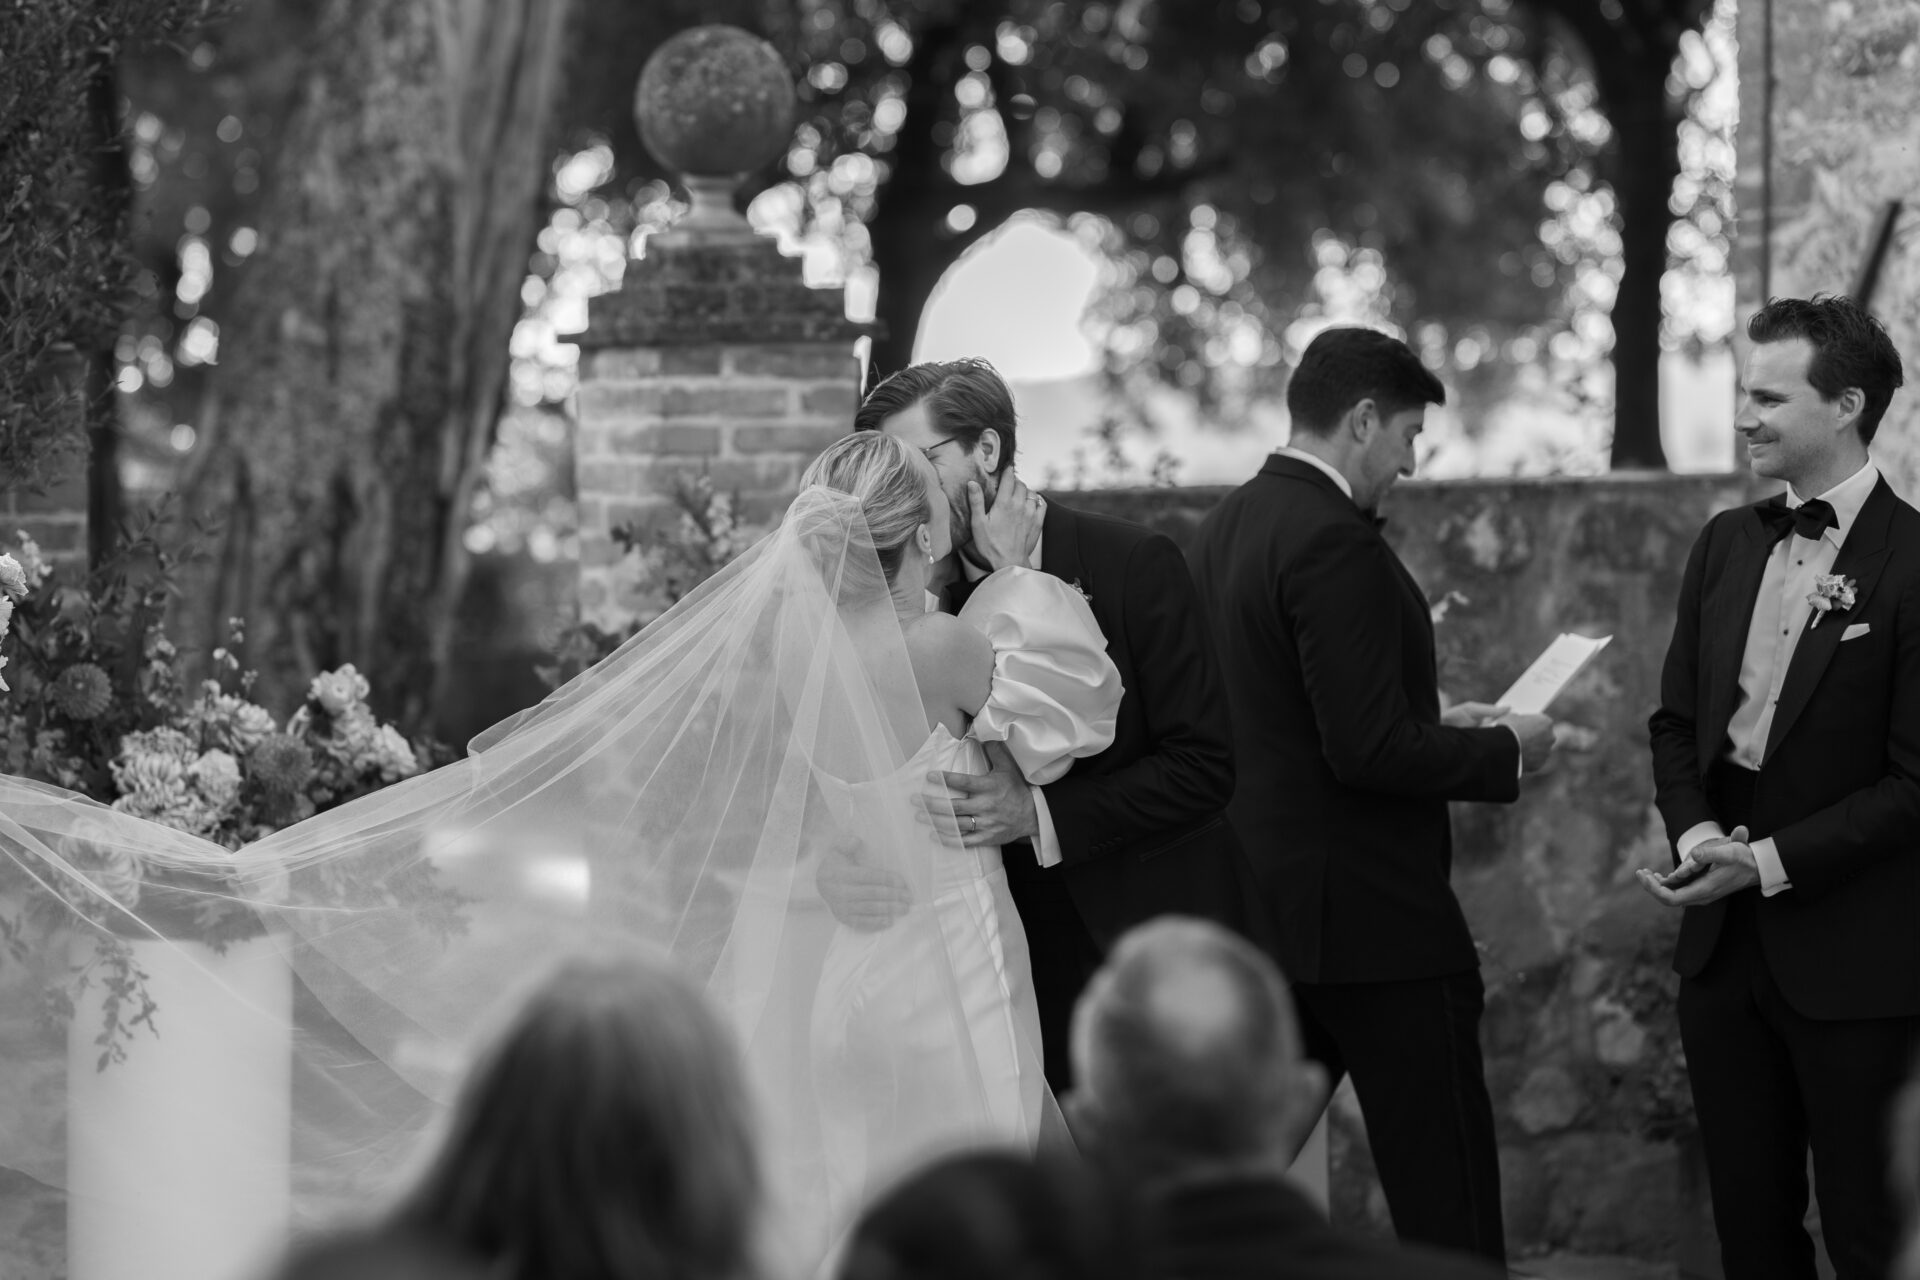 The bride and groom share their first kiss during their luxury Tuscan wedding ceremony